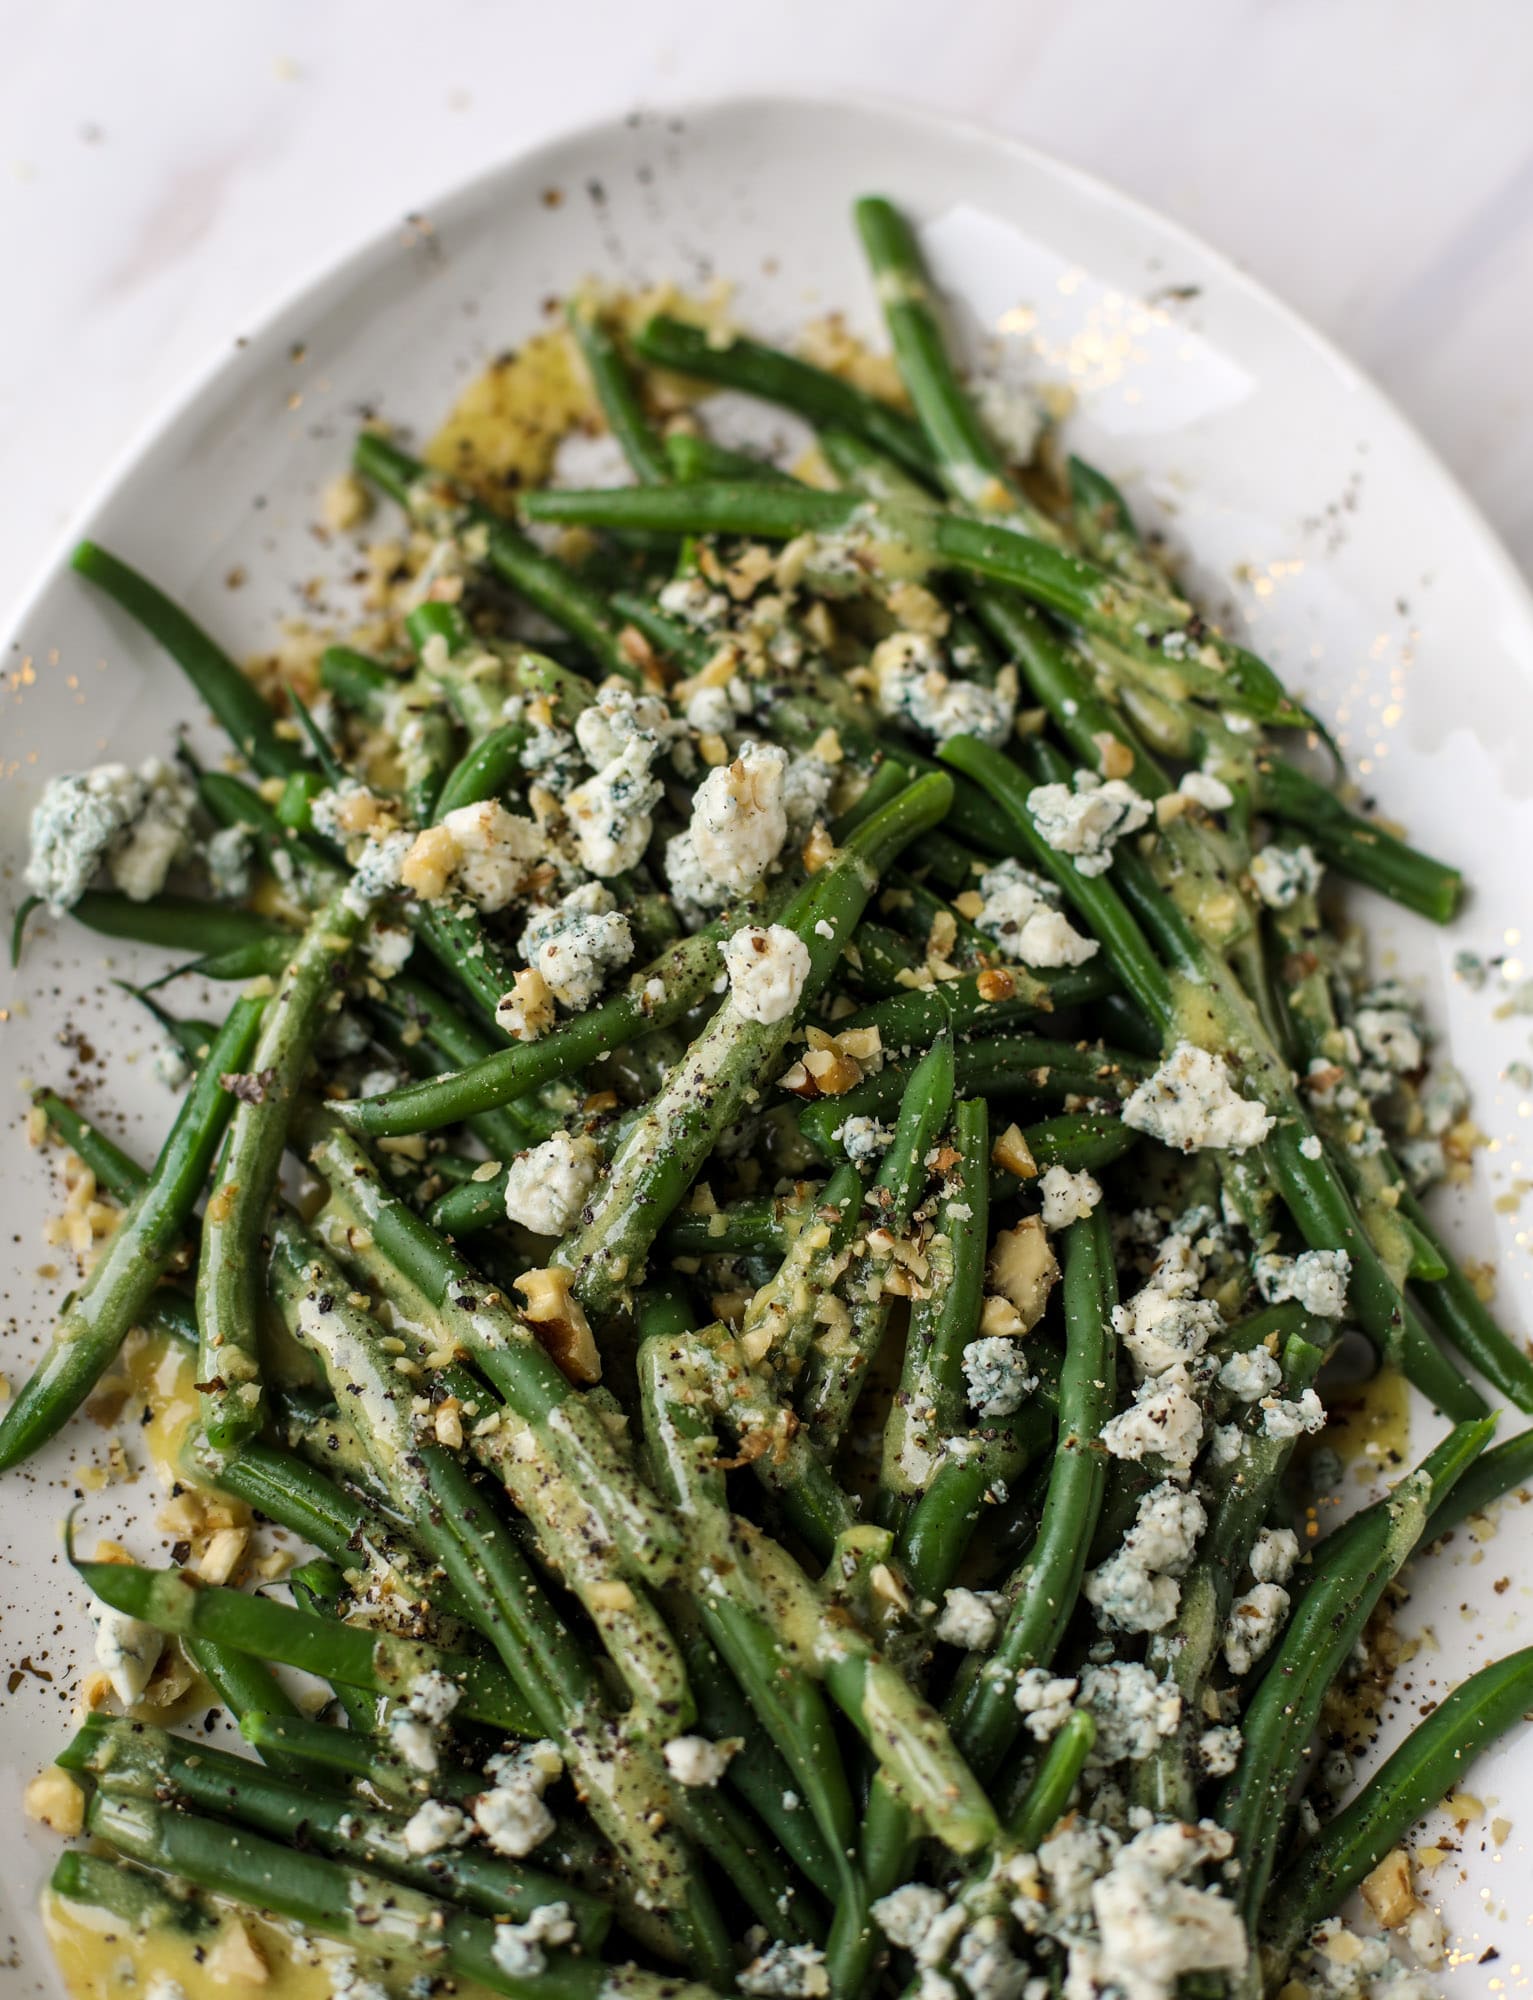 This fresh green bean salad is the ultimate summer side dish. Crisp green beans, creamy blue cheese, chopped walnuts and a dijon dressing. It's beyond!